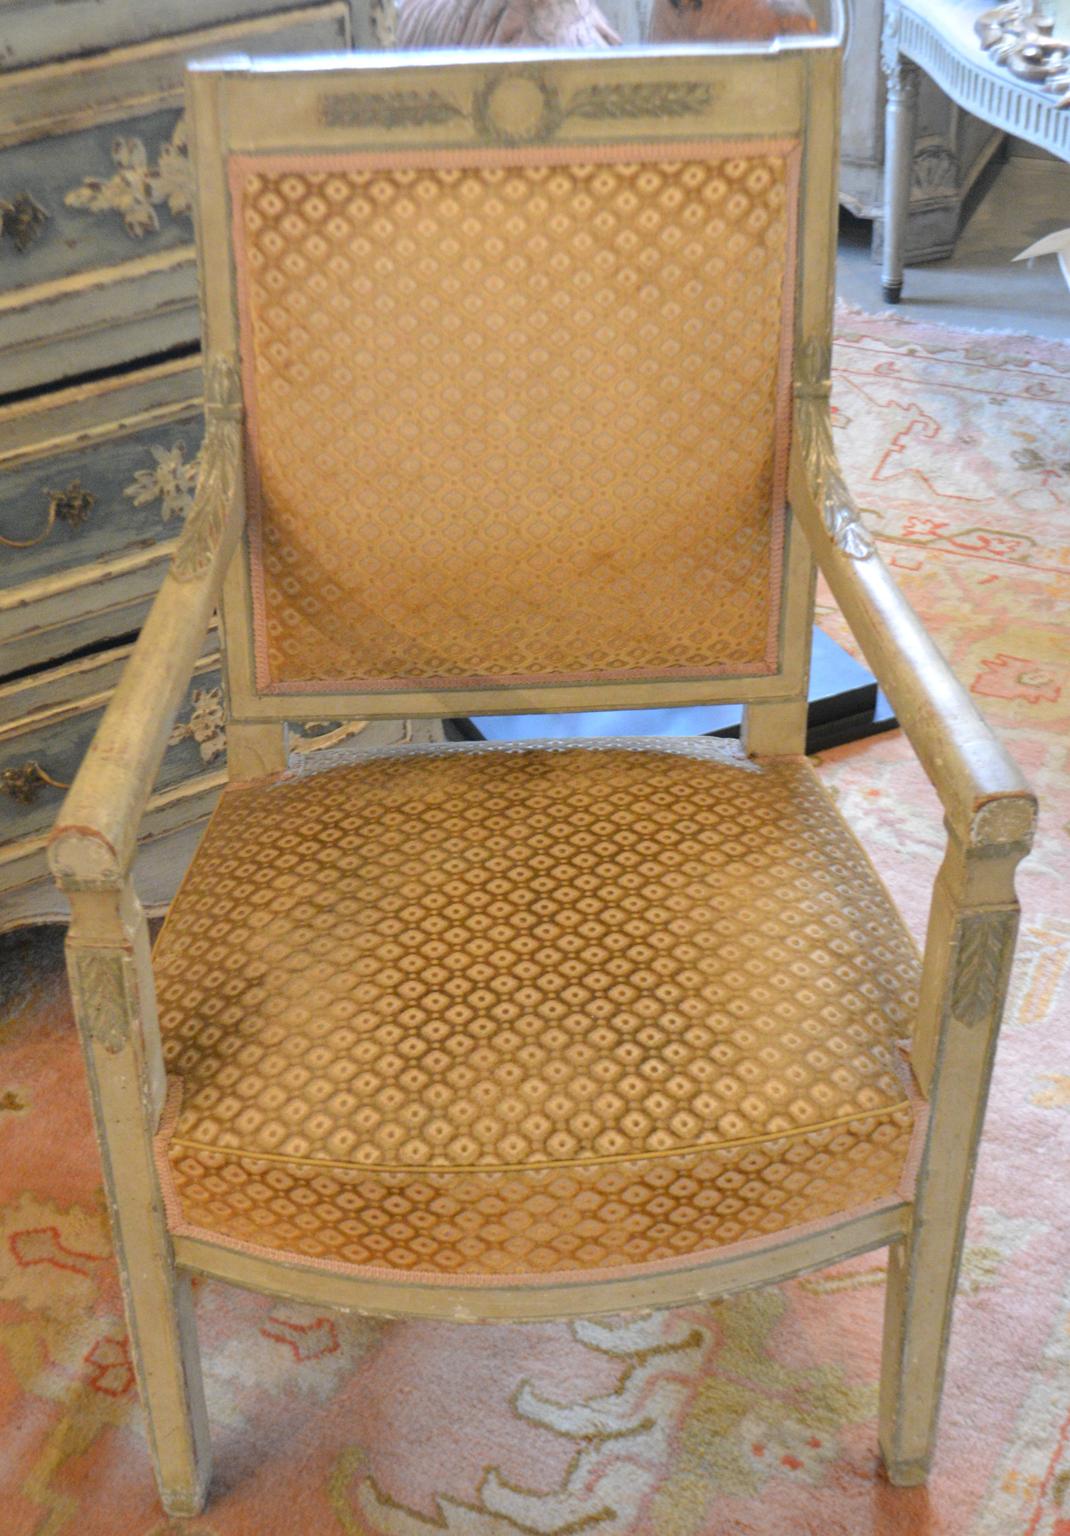 18th century, Directoire polychrome fauteuil
rectangular back surmounted by a foliate wreath-carved crest, joined by rounded arms to the padded set, raised on paneled square legs, upholstered in cut velvet. Measures: Seat height 16